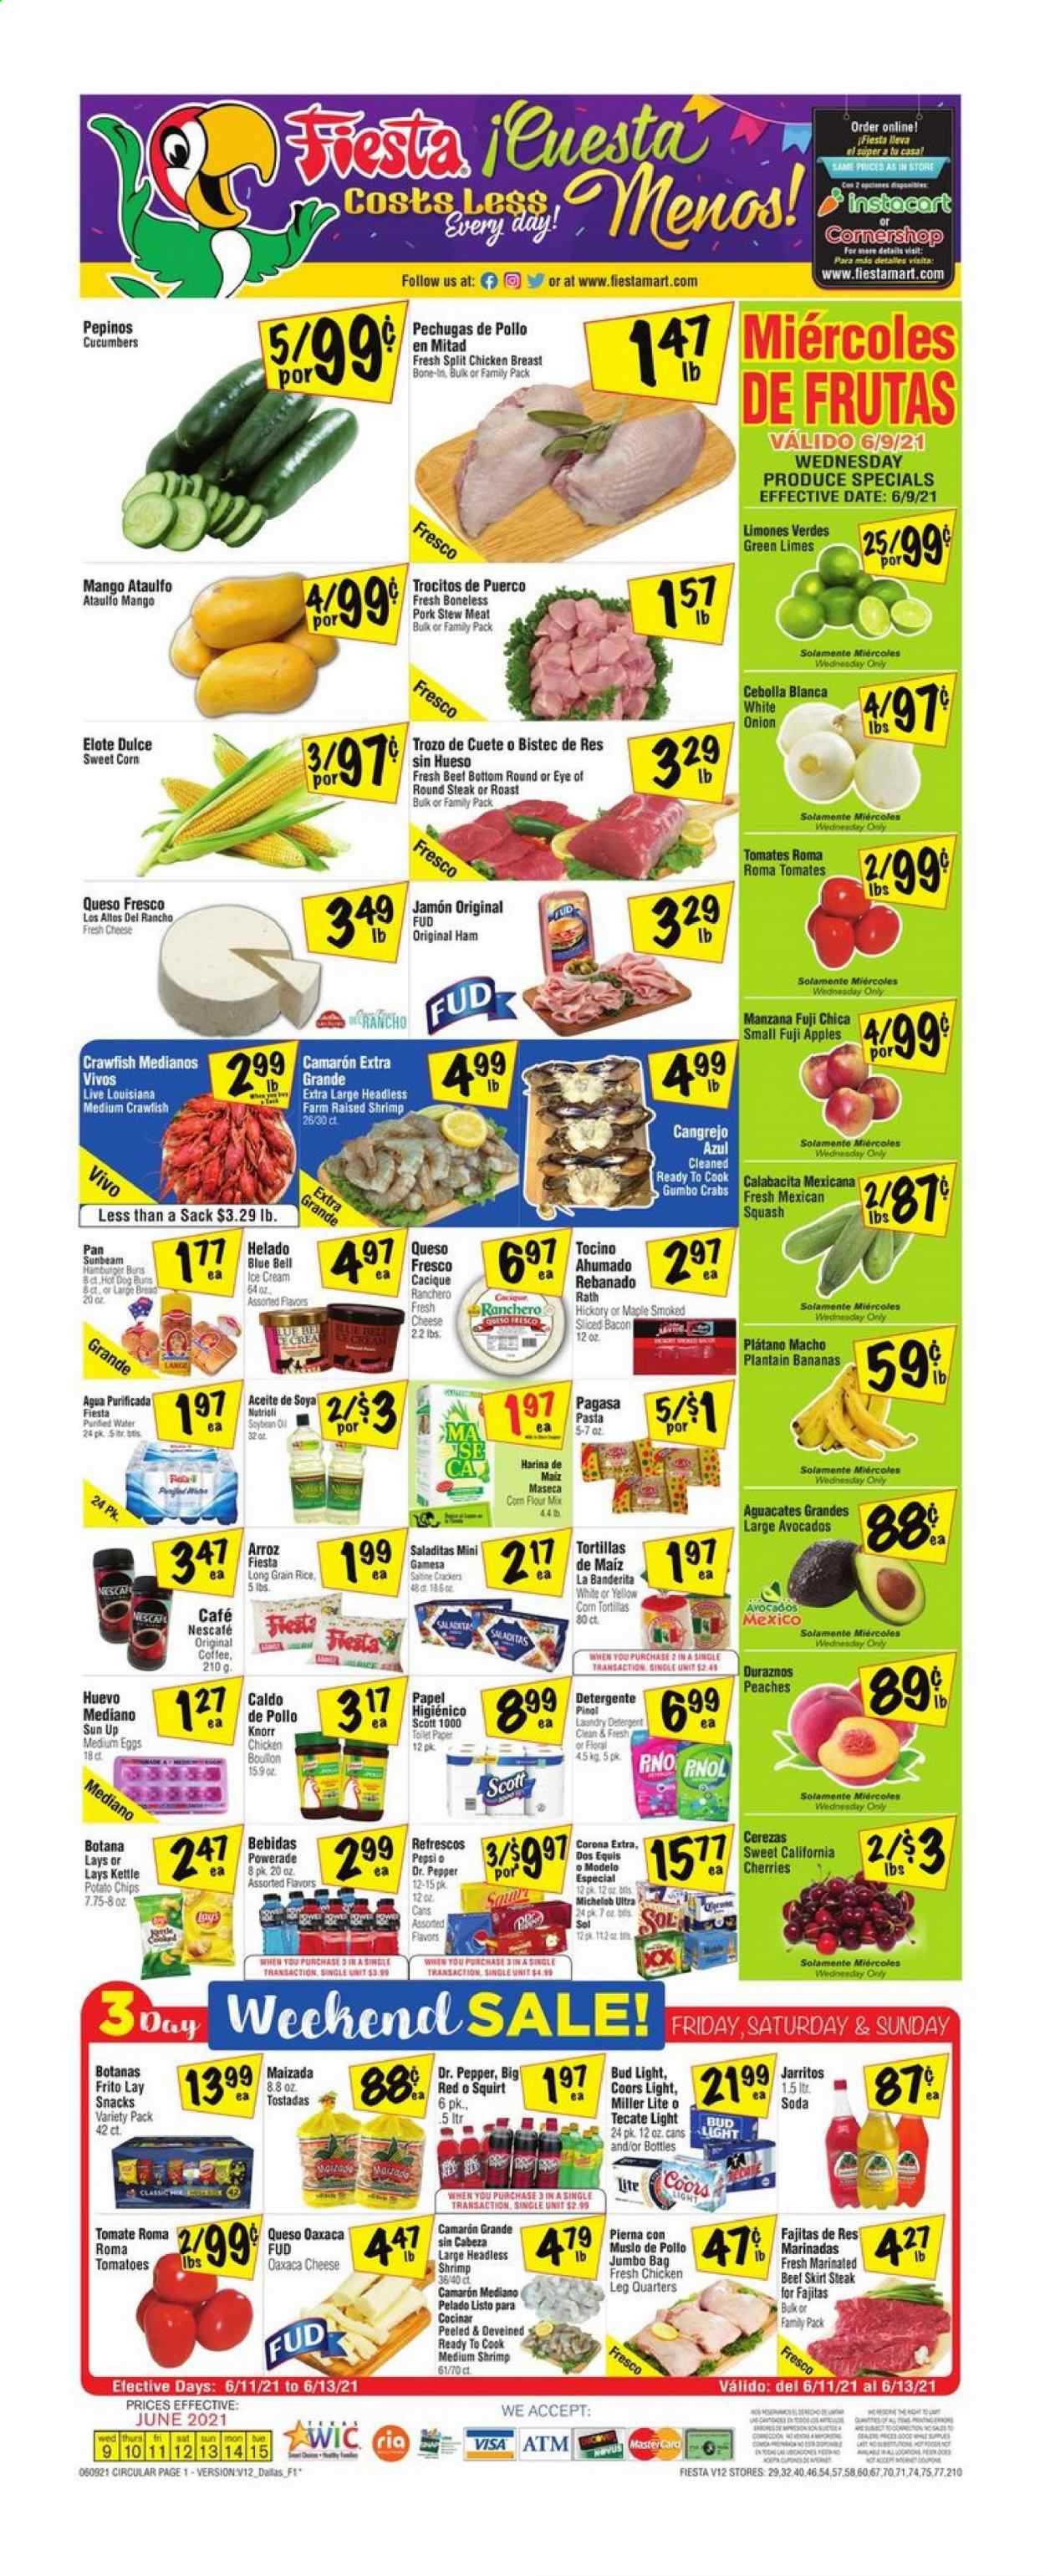 thumbnail - Fiesta Mart Flyer - 06/09/2021 - 06/15/2021 - Sales products - Miller Lite, Coors, Dos Equis, Michelob, stew meat, bread, tortillas, buns, tostadas, corn, cucumber, tomatoes, sweet corn, apples, avocado, limes, mango, cherries, Fuji apple, crab, shrimps, pasta, Knorr, fajita, bacon, ham, queso fresco, cheese, eggs, ice cream, Blue Bell, crawfish, snack, crackers, chips, Lay’s, long grain rice, Powerade, Pepsi, soda, Dr. Pepper, purified water, beer, Bud Light, Corona Extra, Sol, Modelo, chicken breasts, chicken legs, beef meat, steak, eye of round, round steak, marinated beef, toilet paper, detergent, laundry detergent, Scott, Sunbeam, peaches. Page 1.